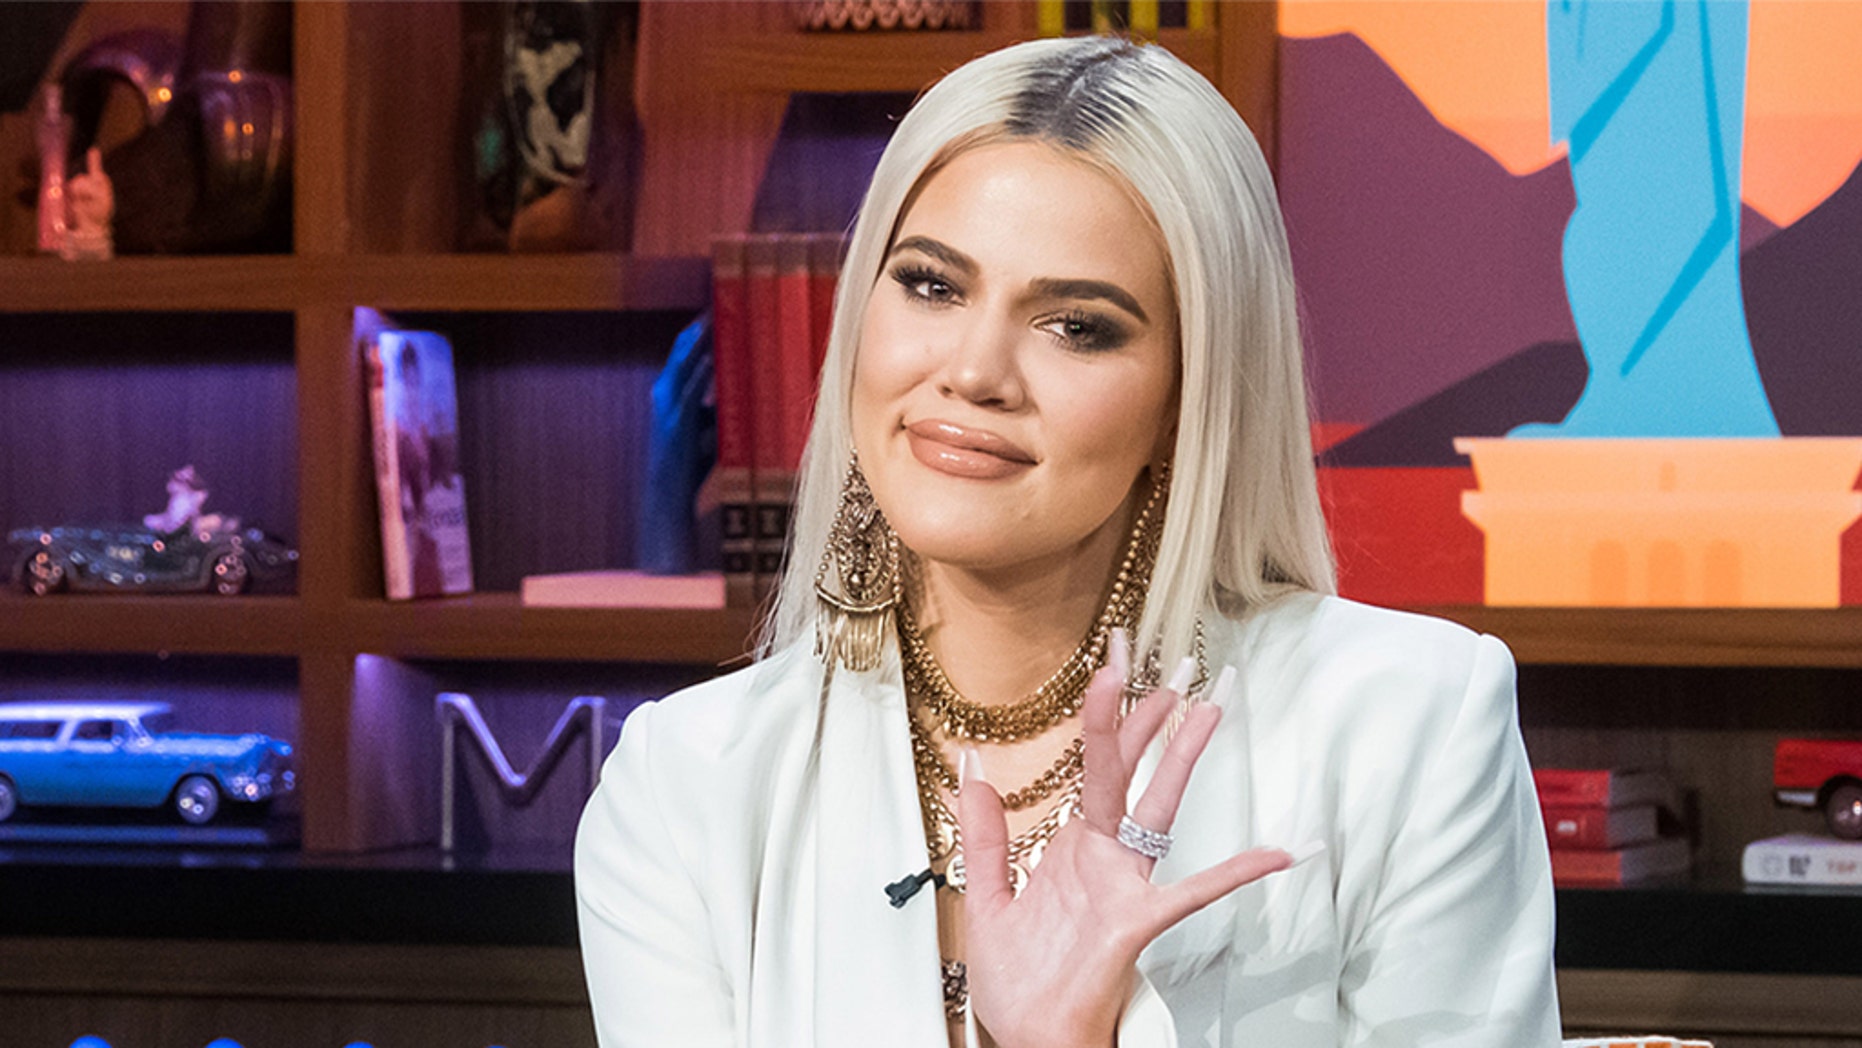 Khloe Kardashian seemed to let the emoticons talk to each other while Tristan Thompson - his NBA boyfriend and father of his child - was unfaithful to him.